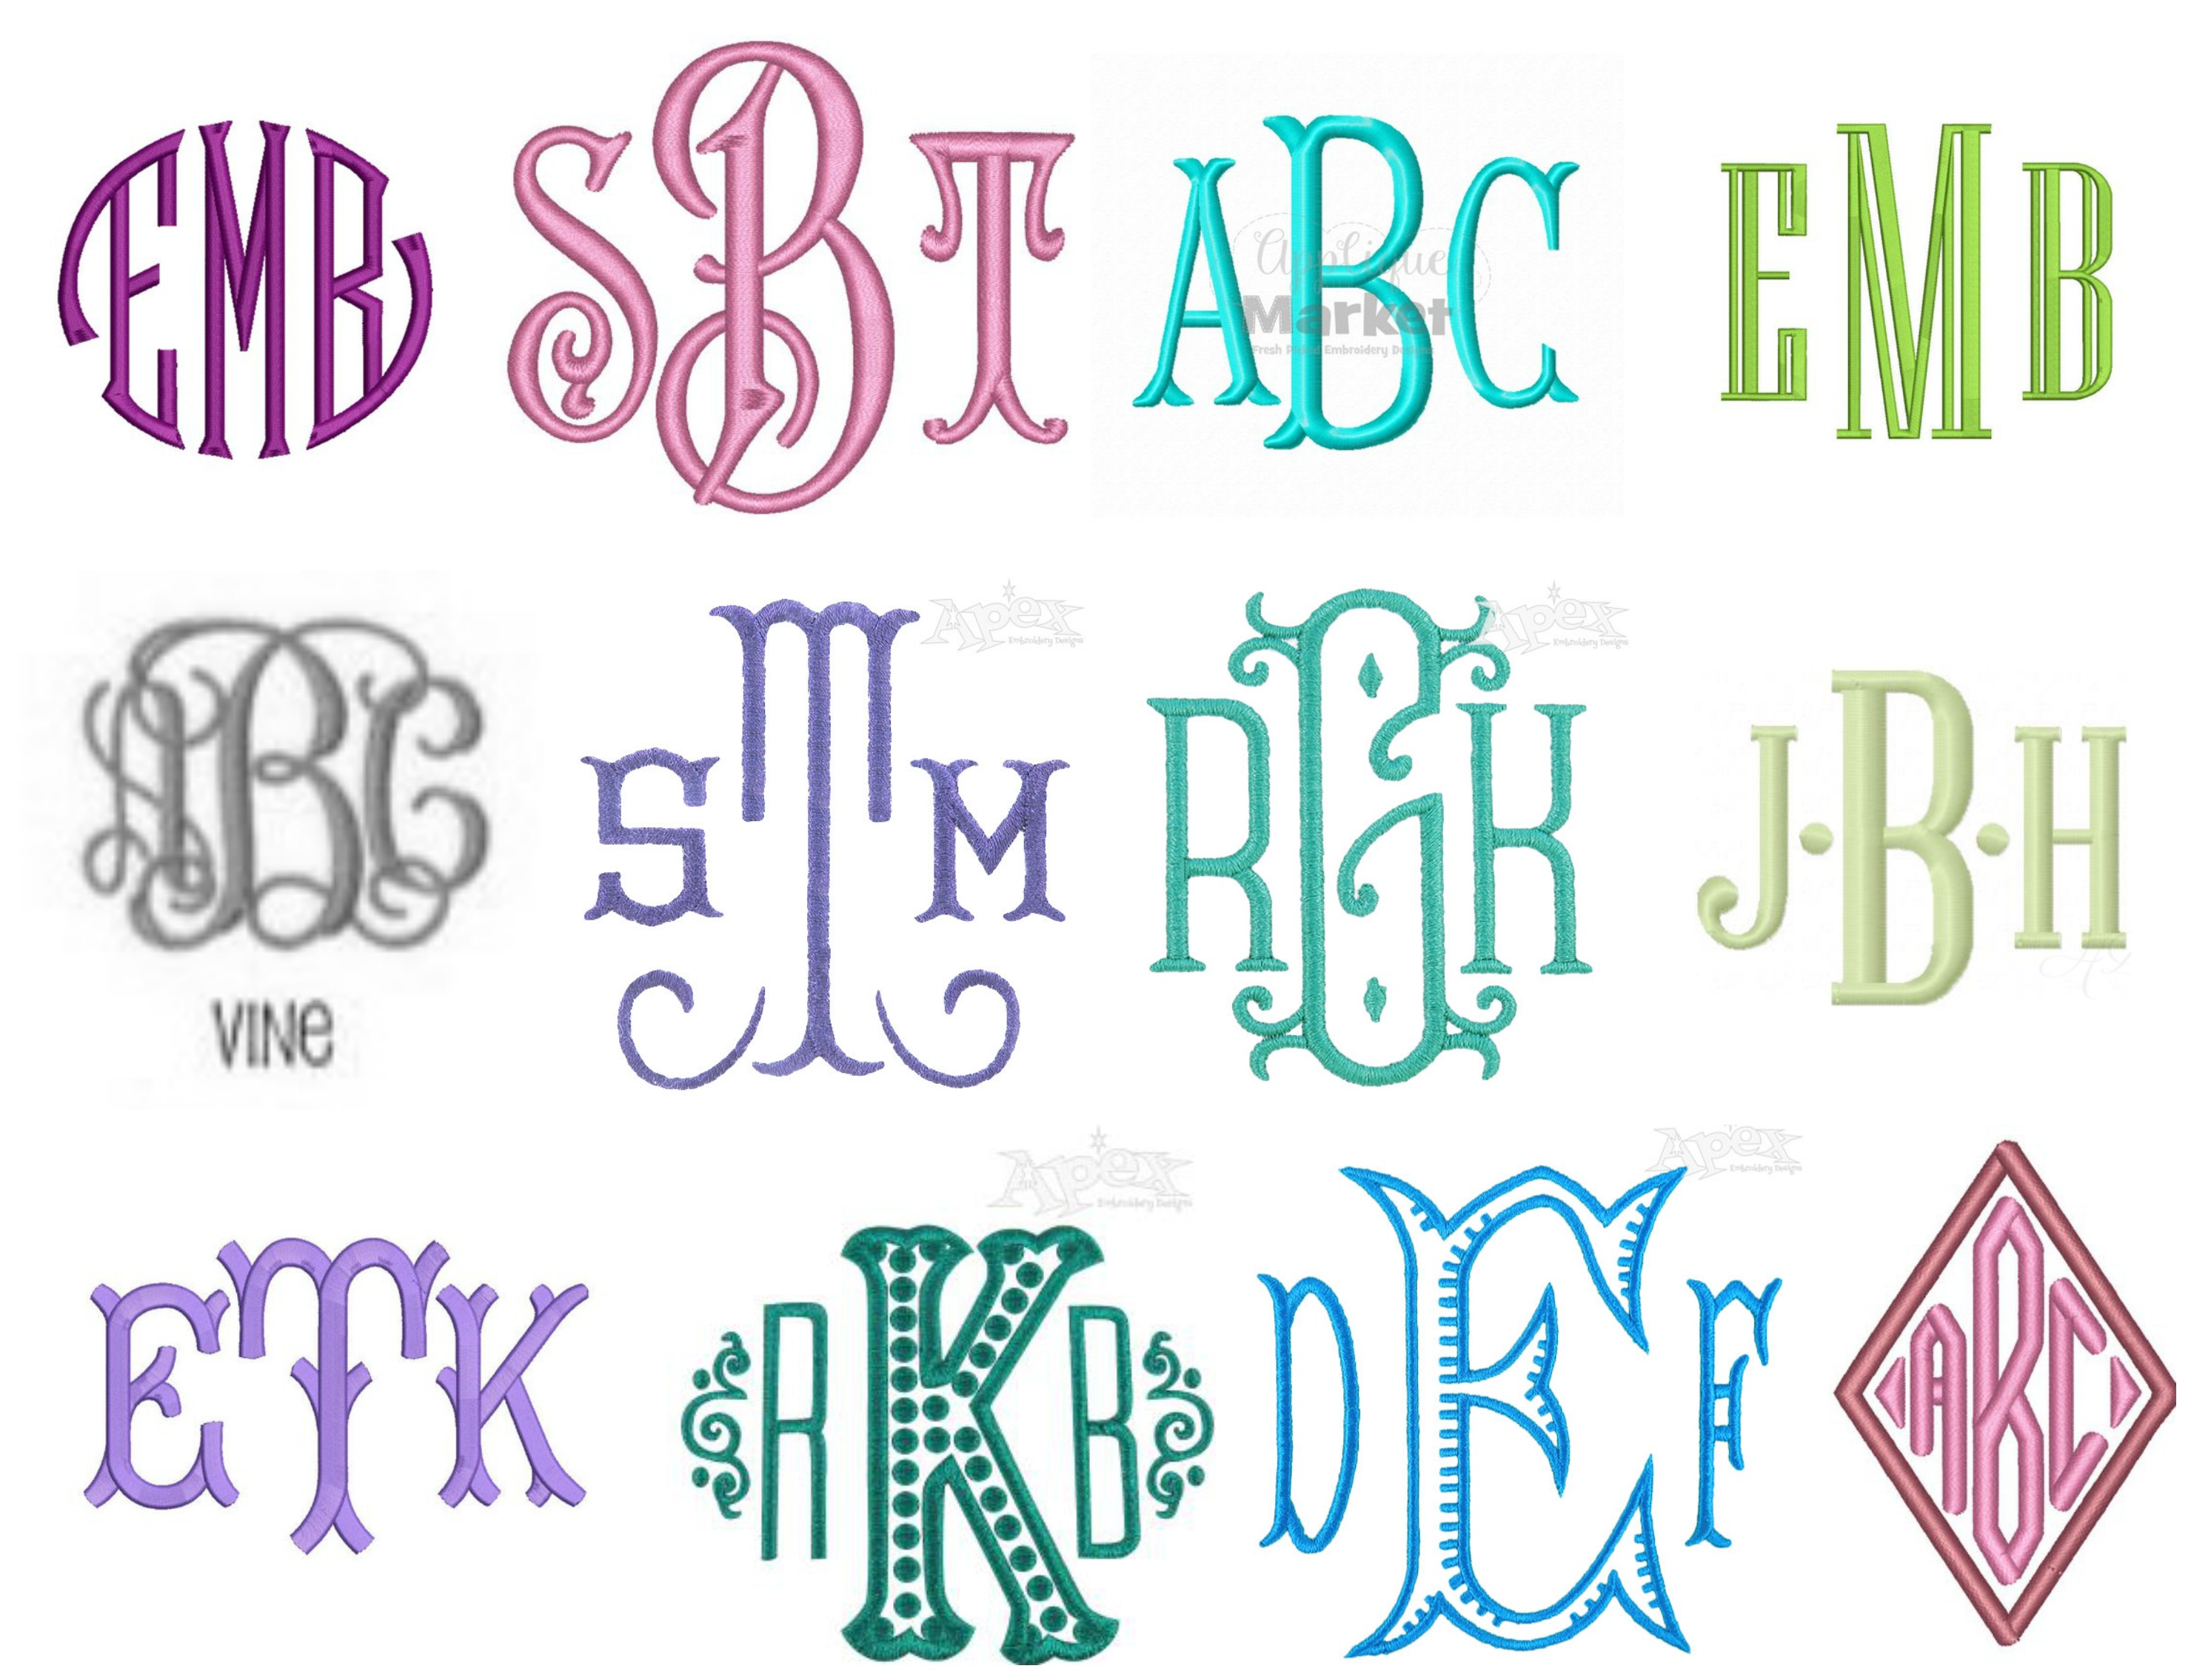 What Is A Monogram Letter